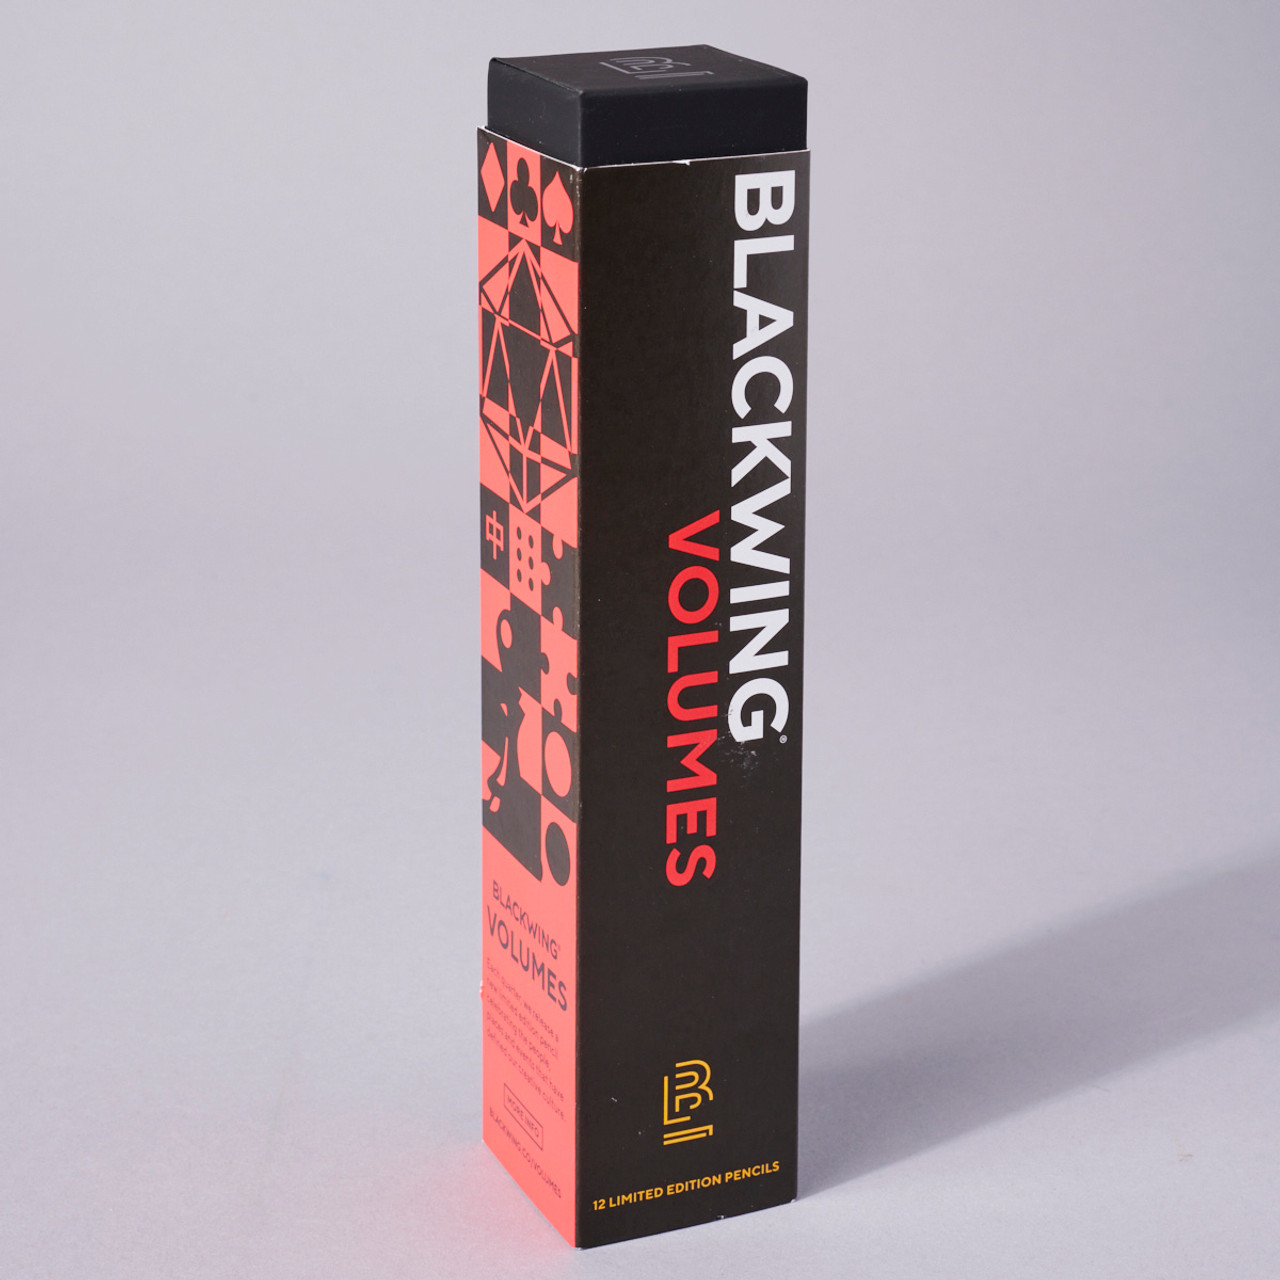 Blackwing Tabletop Pencil Set - Volume 20 – Of Aspen Curated Gifts